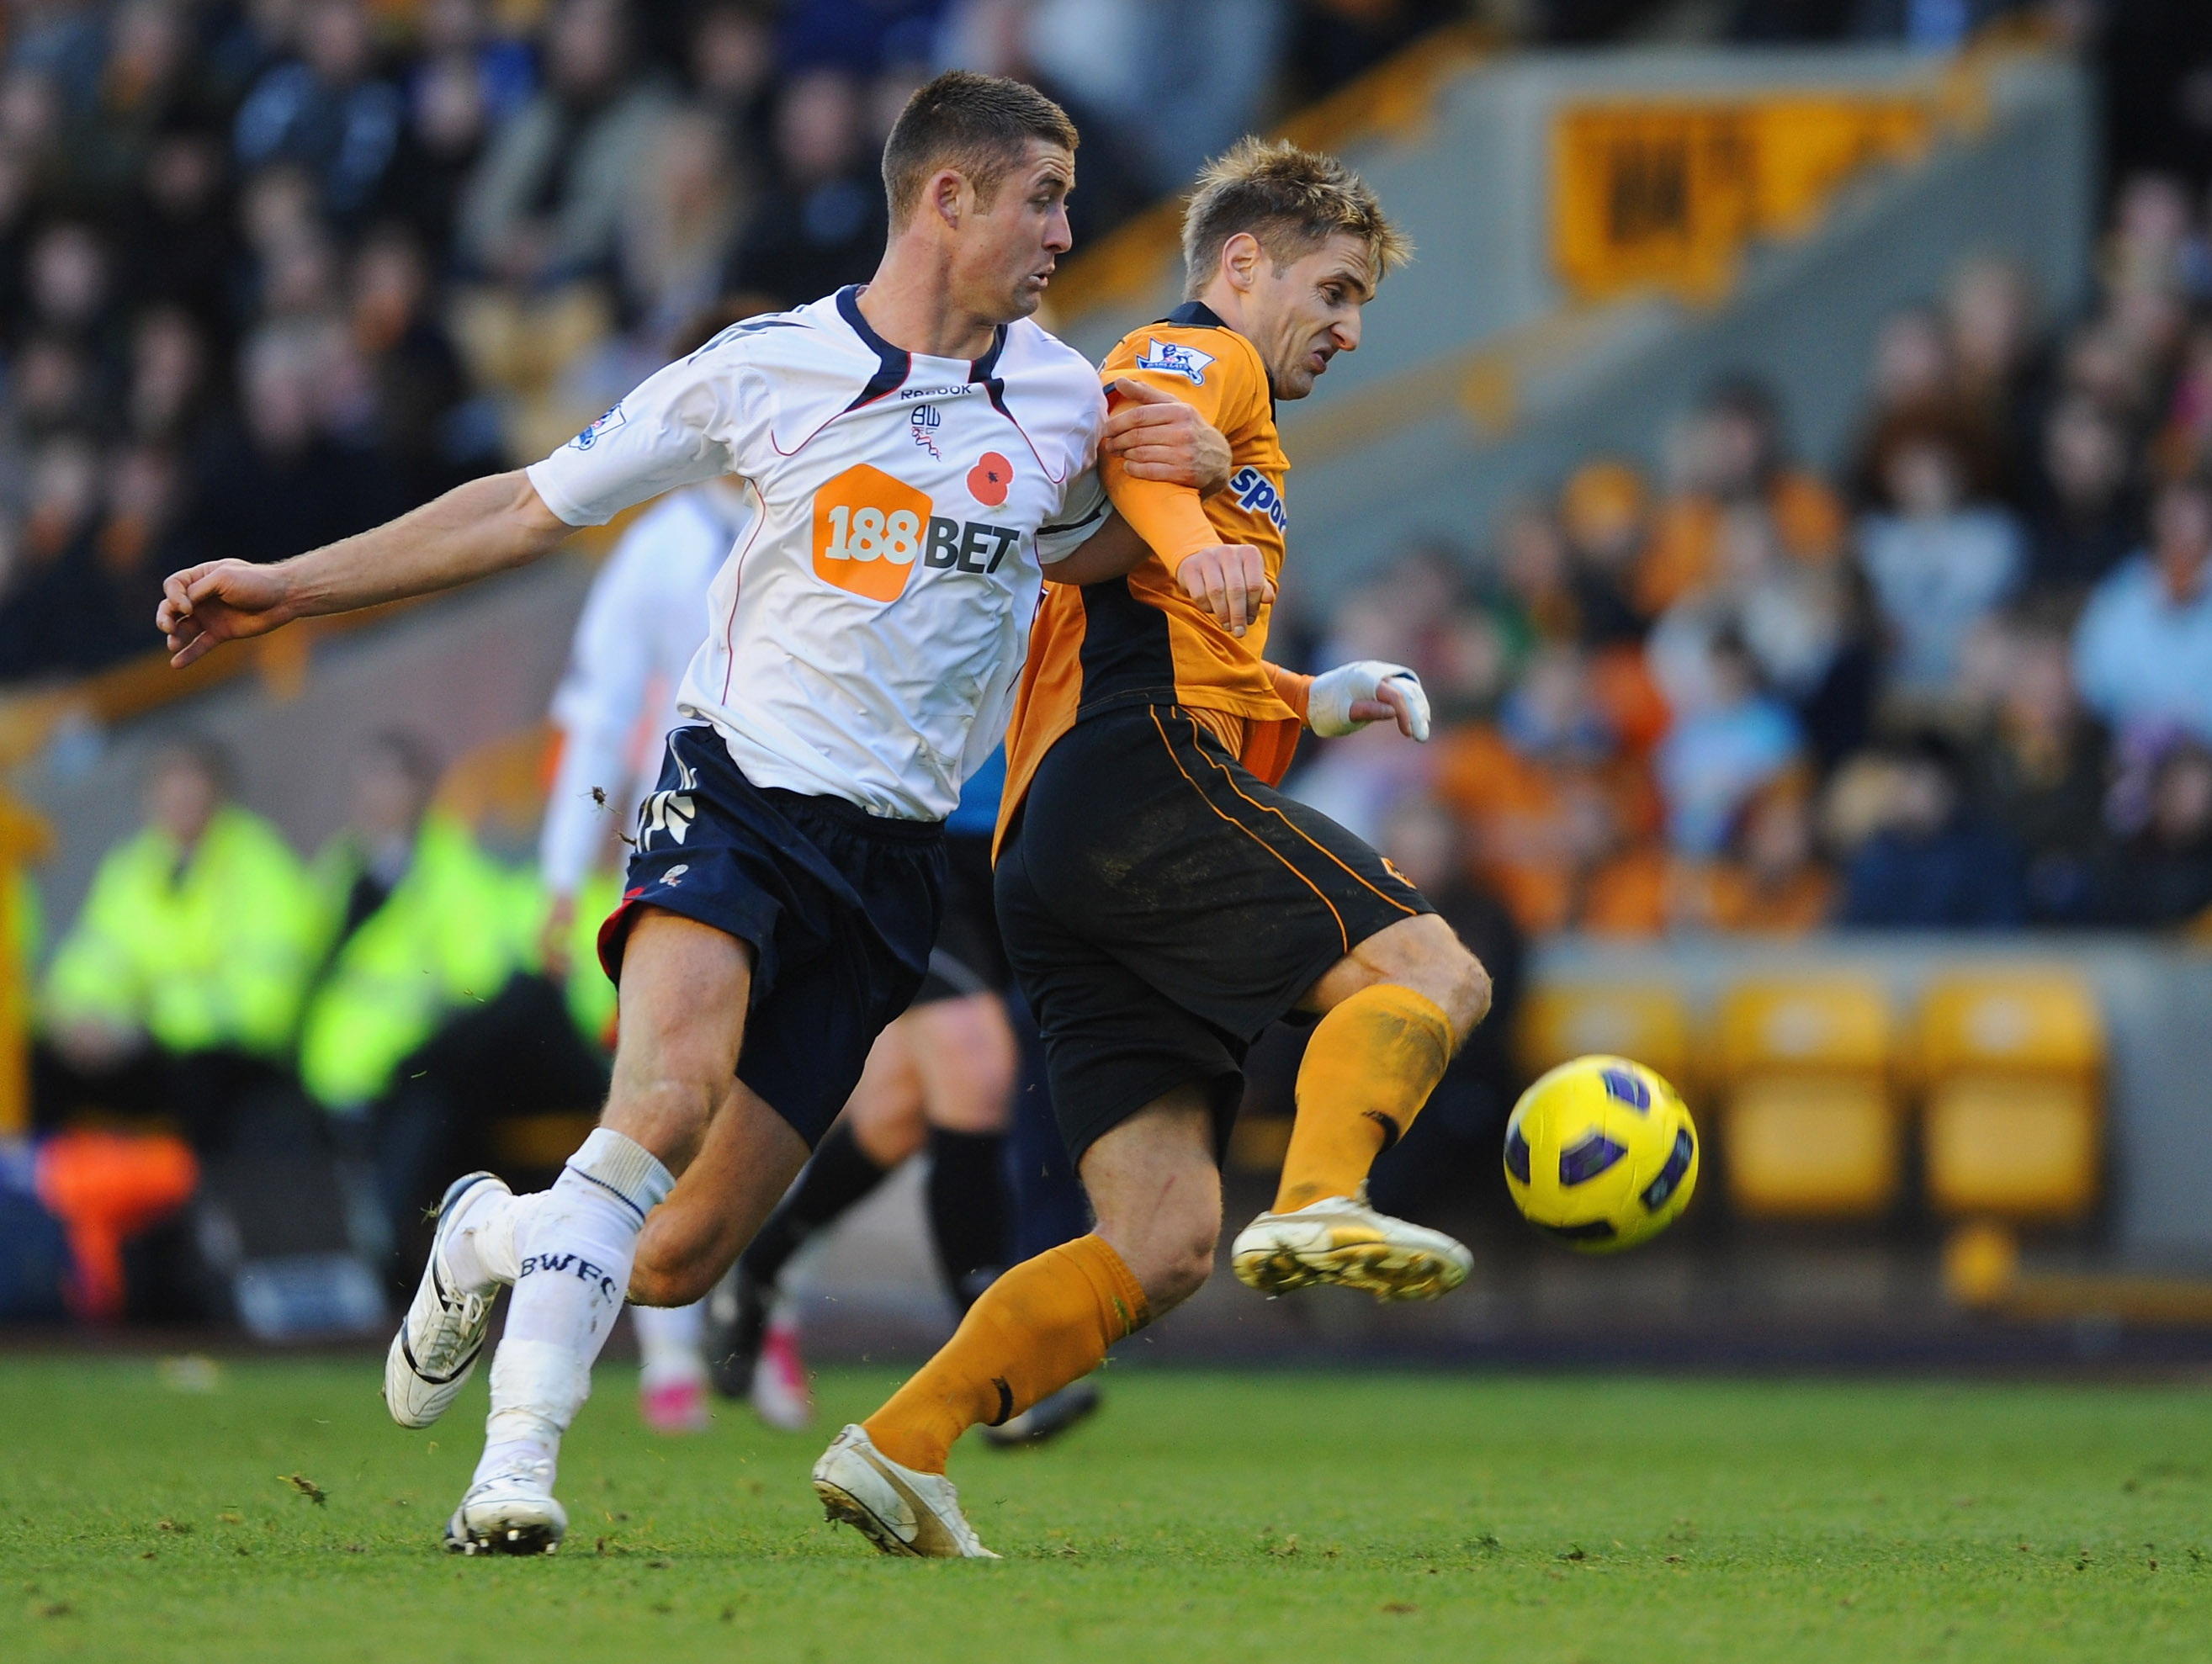 WOLVERHAMPTON, ENGLAND - NOVEMBER 13:  Gary Cahill of Bolton in action with  Kevin Doyle of Wolves during the Barclays Premier League match between Wolverhampton Wanderers and Bolton Wanderers at Molineux on November 13, 2010 in Wolverhampton, England.  (